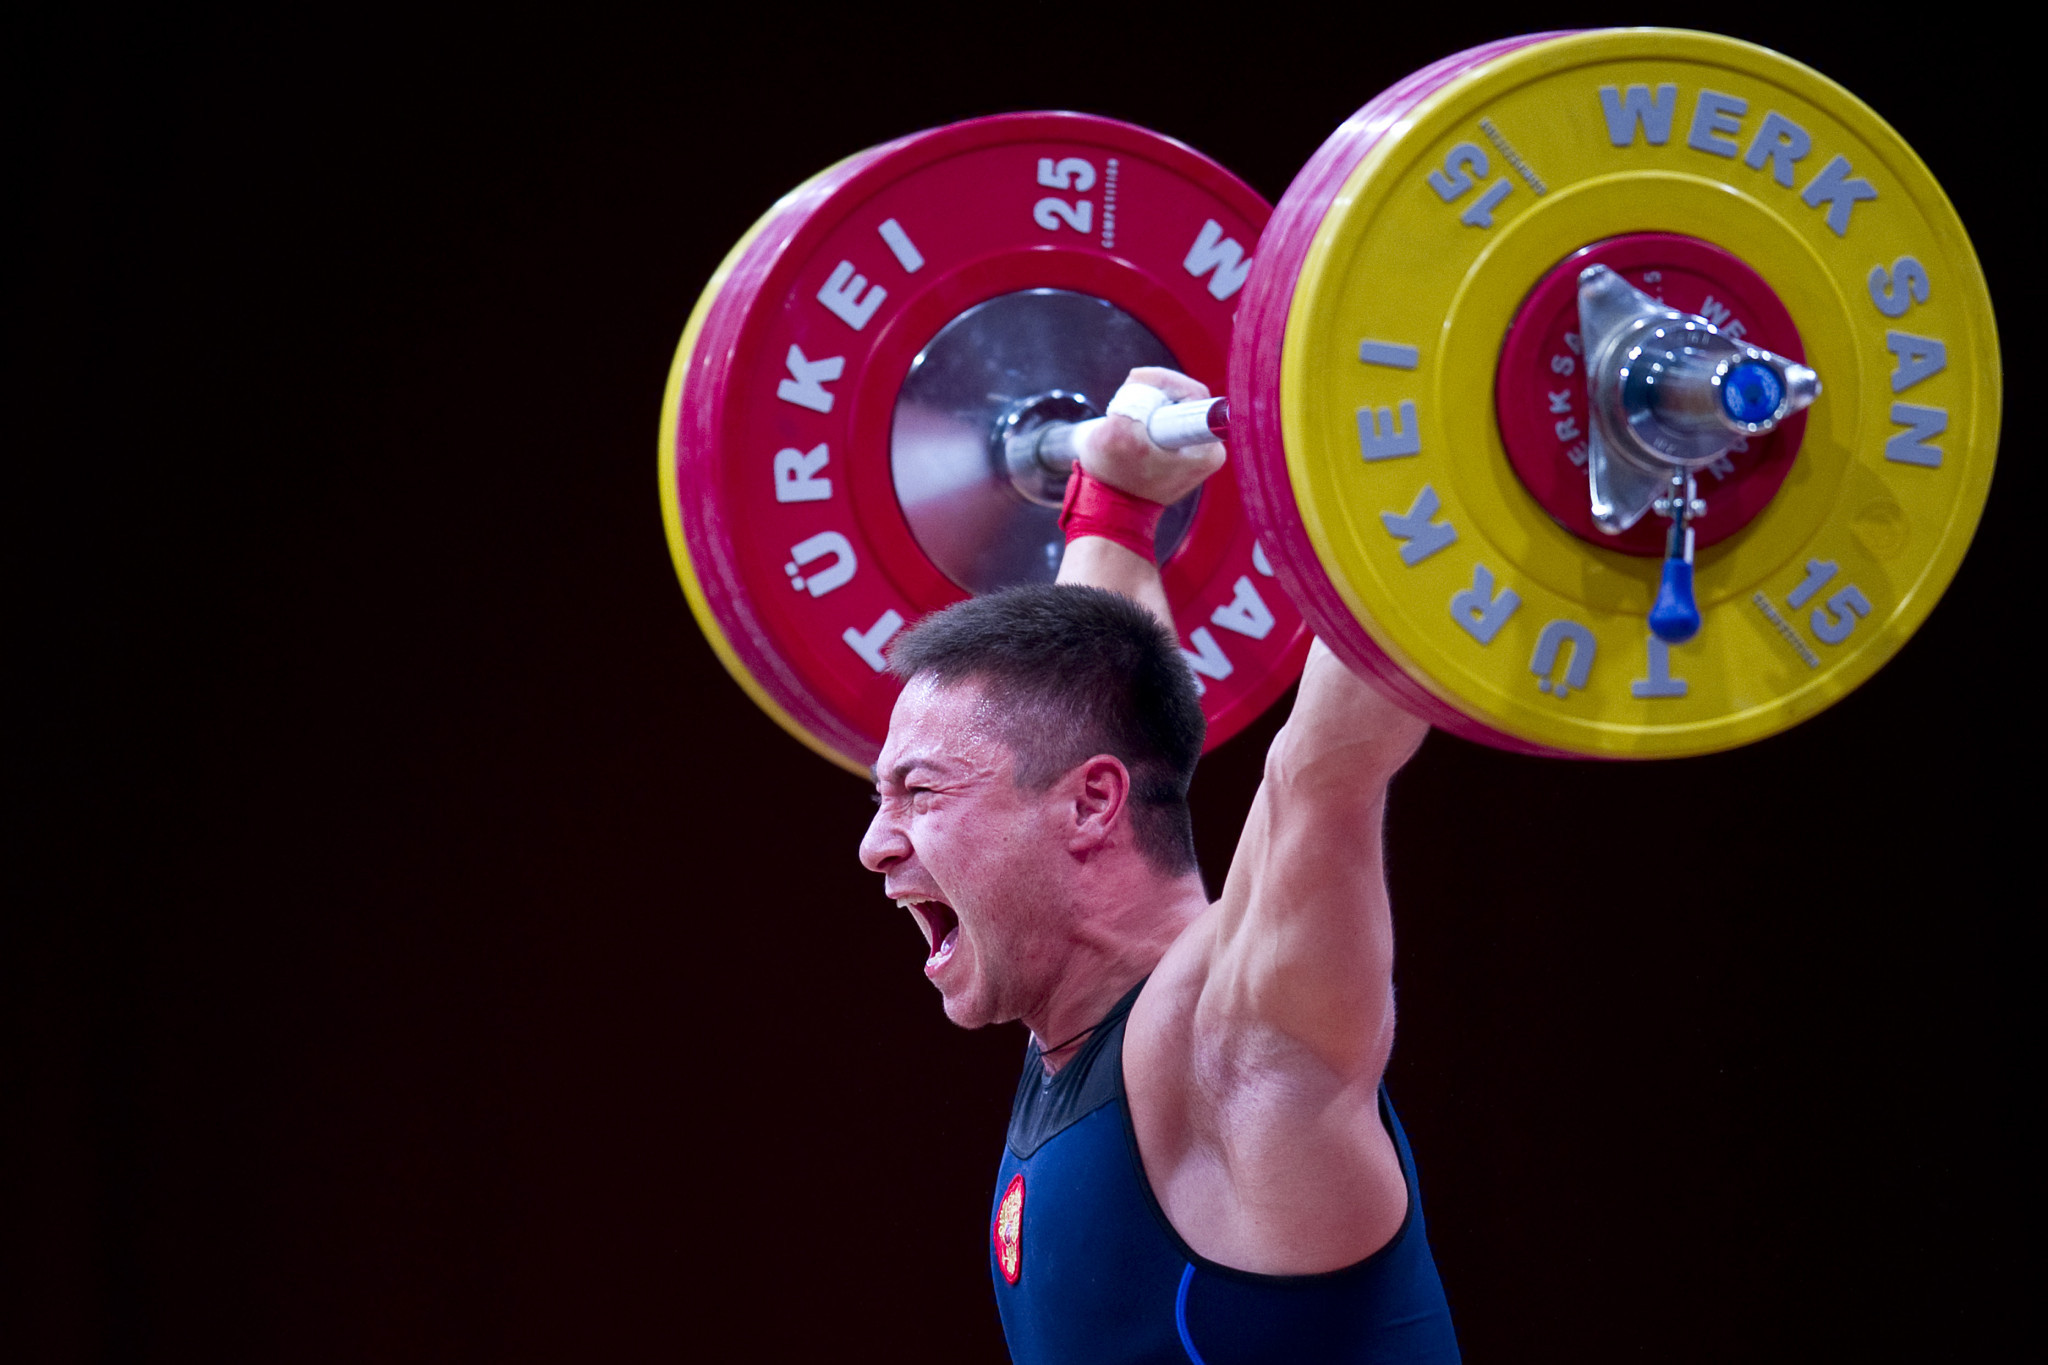 Oleg Chen has also been provisionally suspended by the IWF ©Getty Images